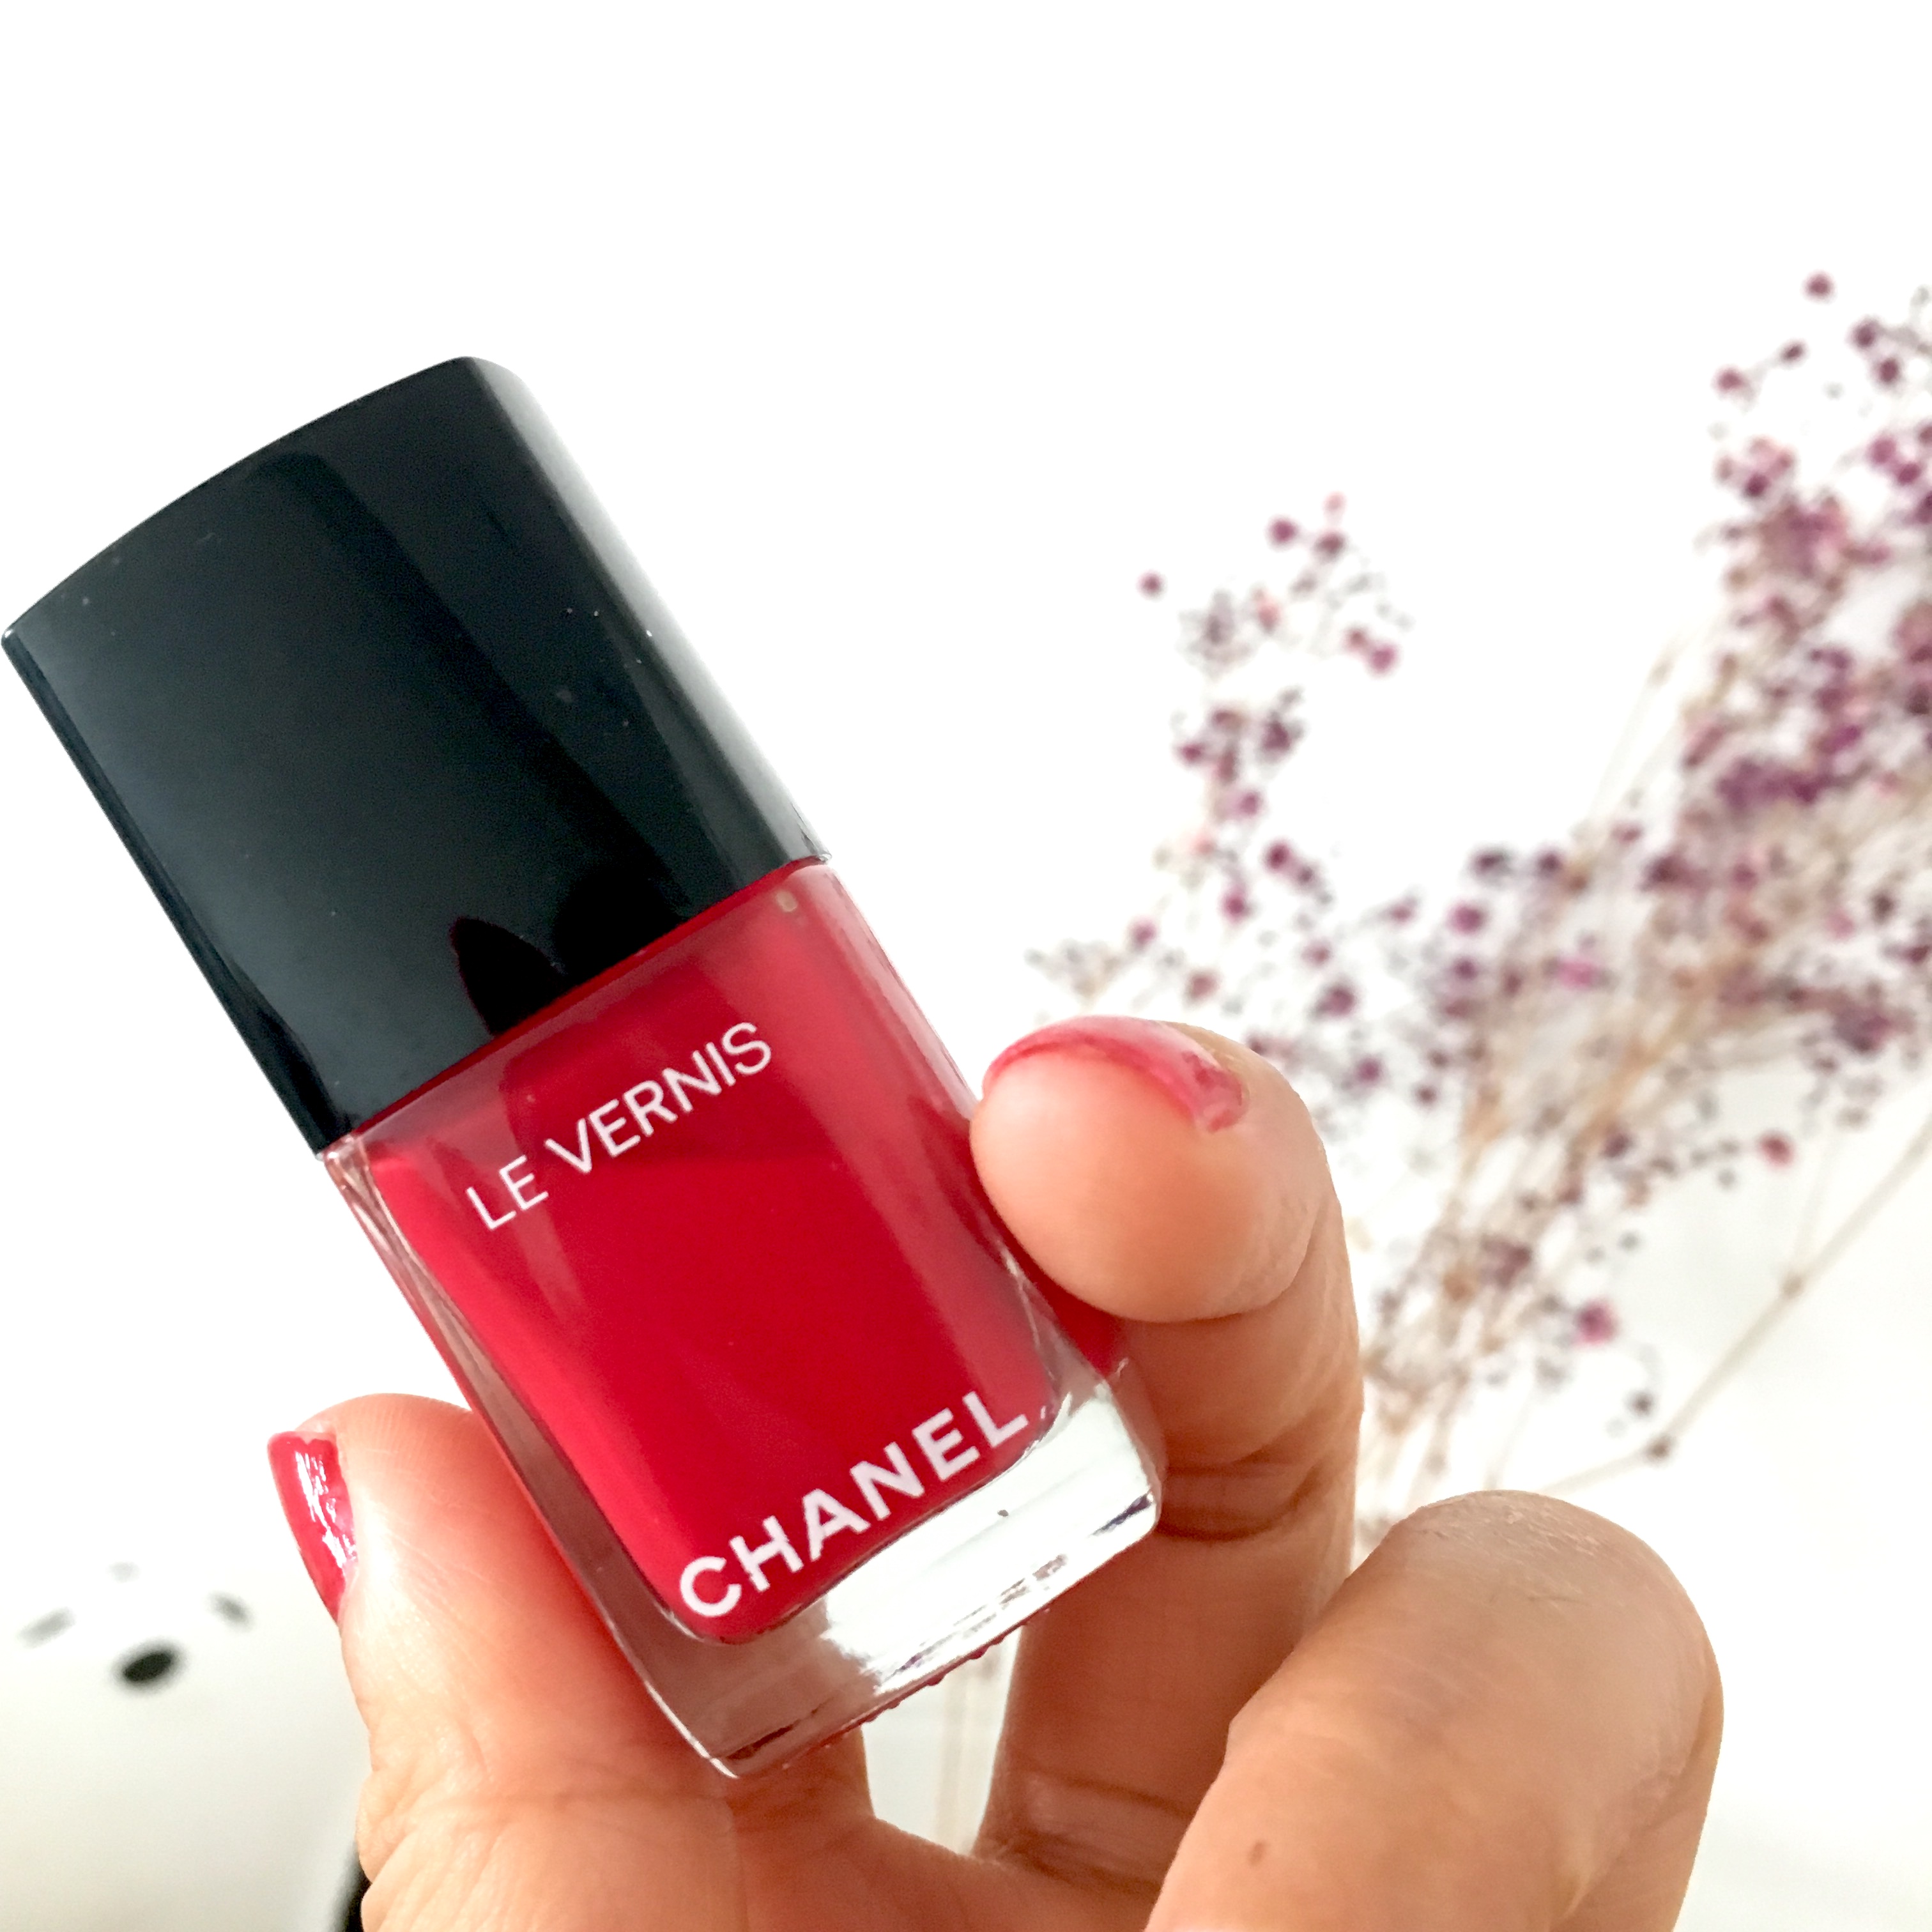 CHANEL LE VERNIS EXQUISITE PINK / My Special One.